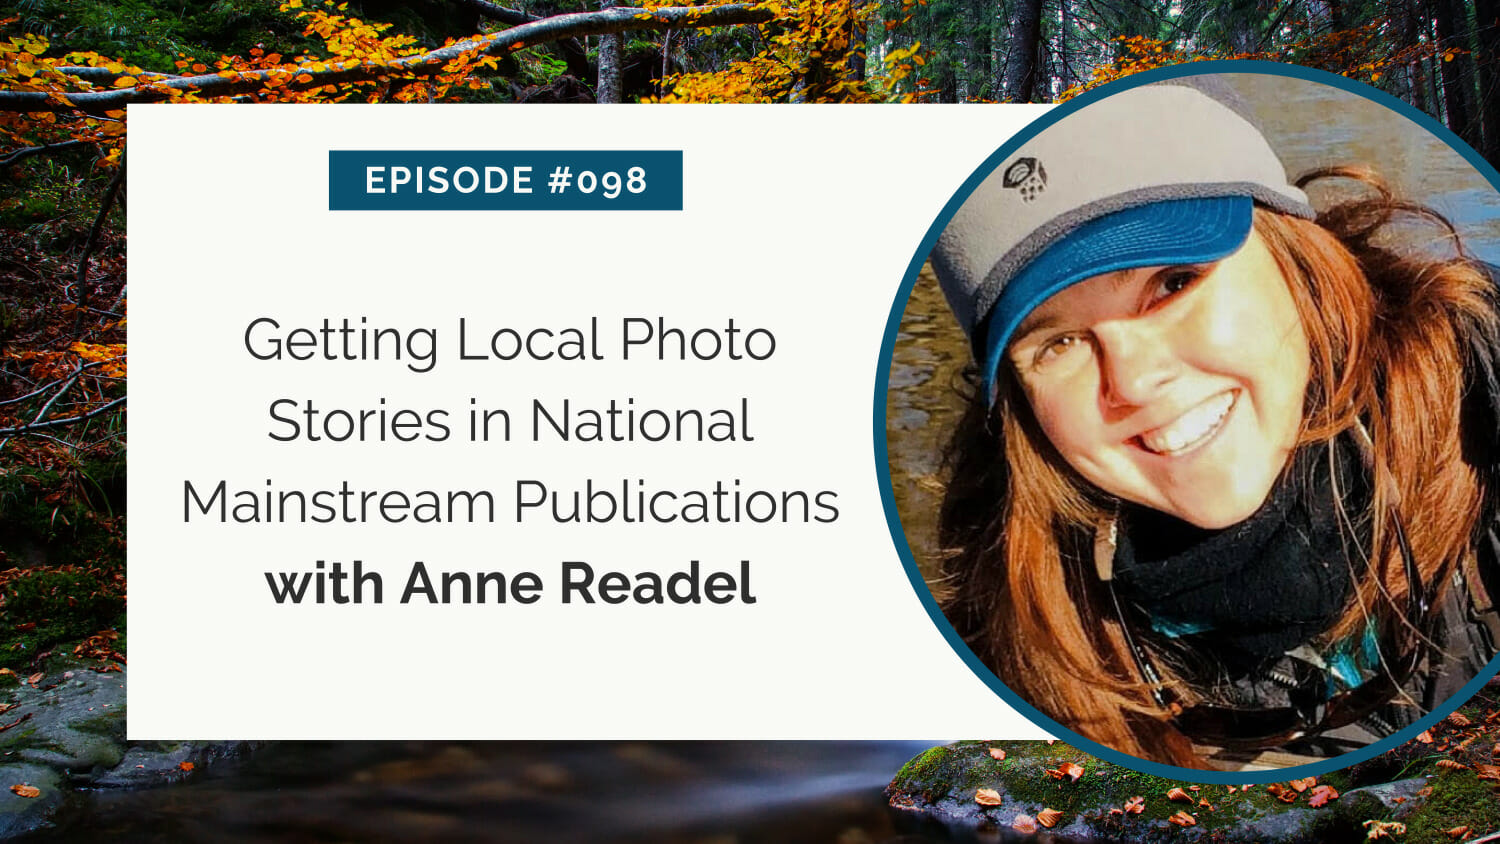 A smiling woman outdoors featured in a promotional graphic for an episode about local photography stories in national publications.